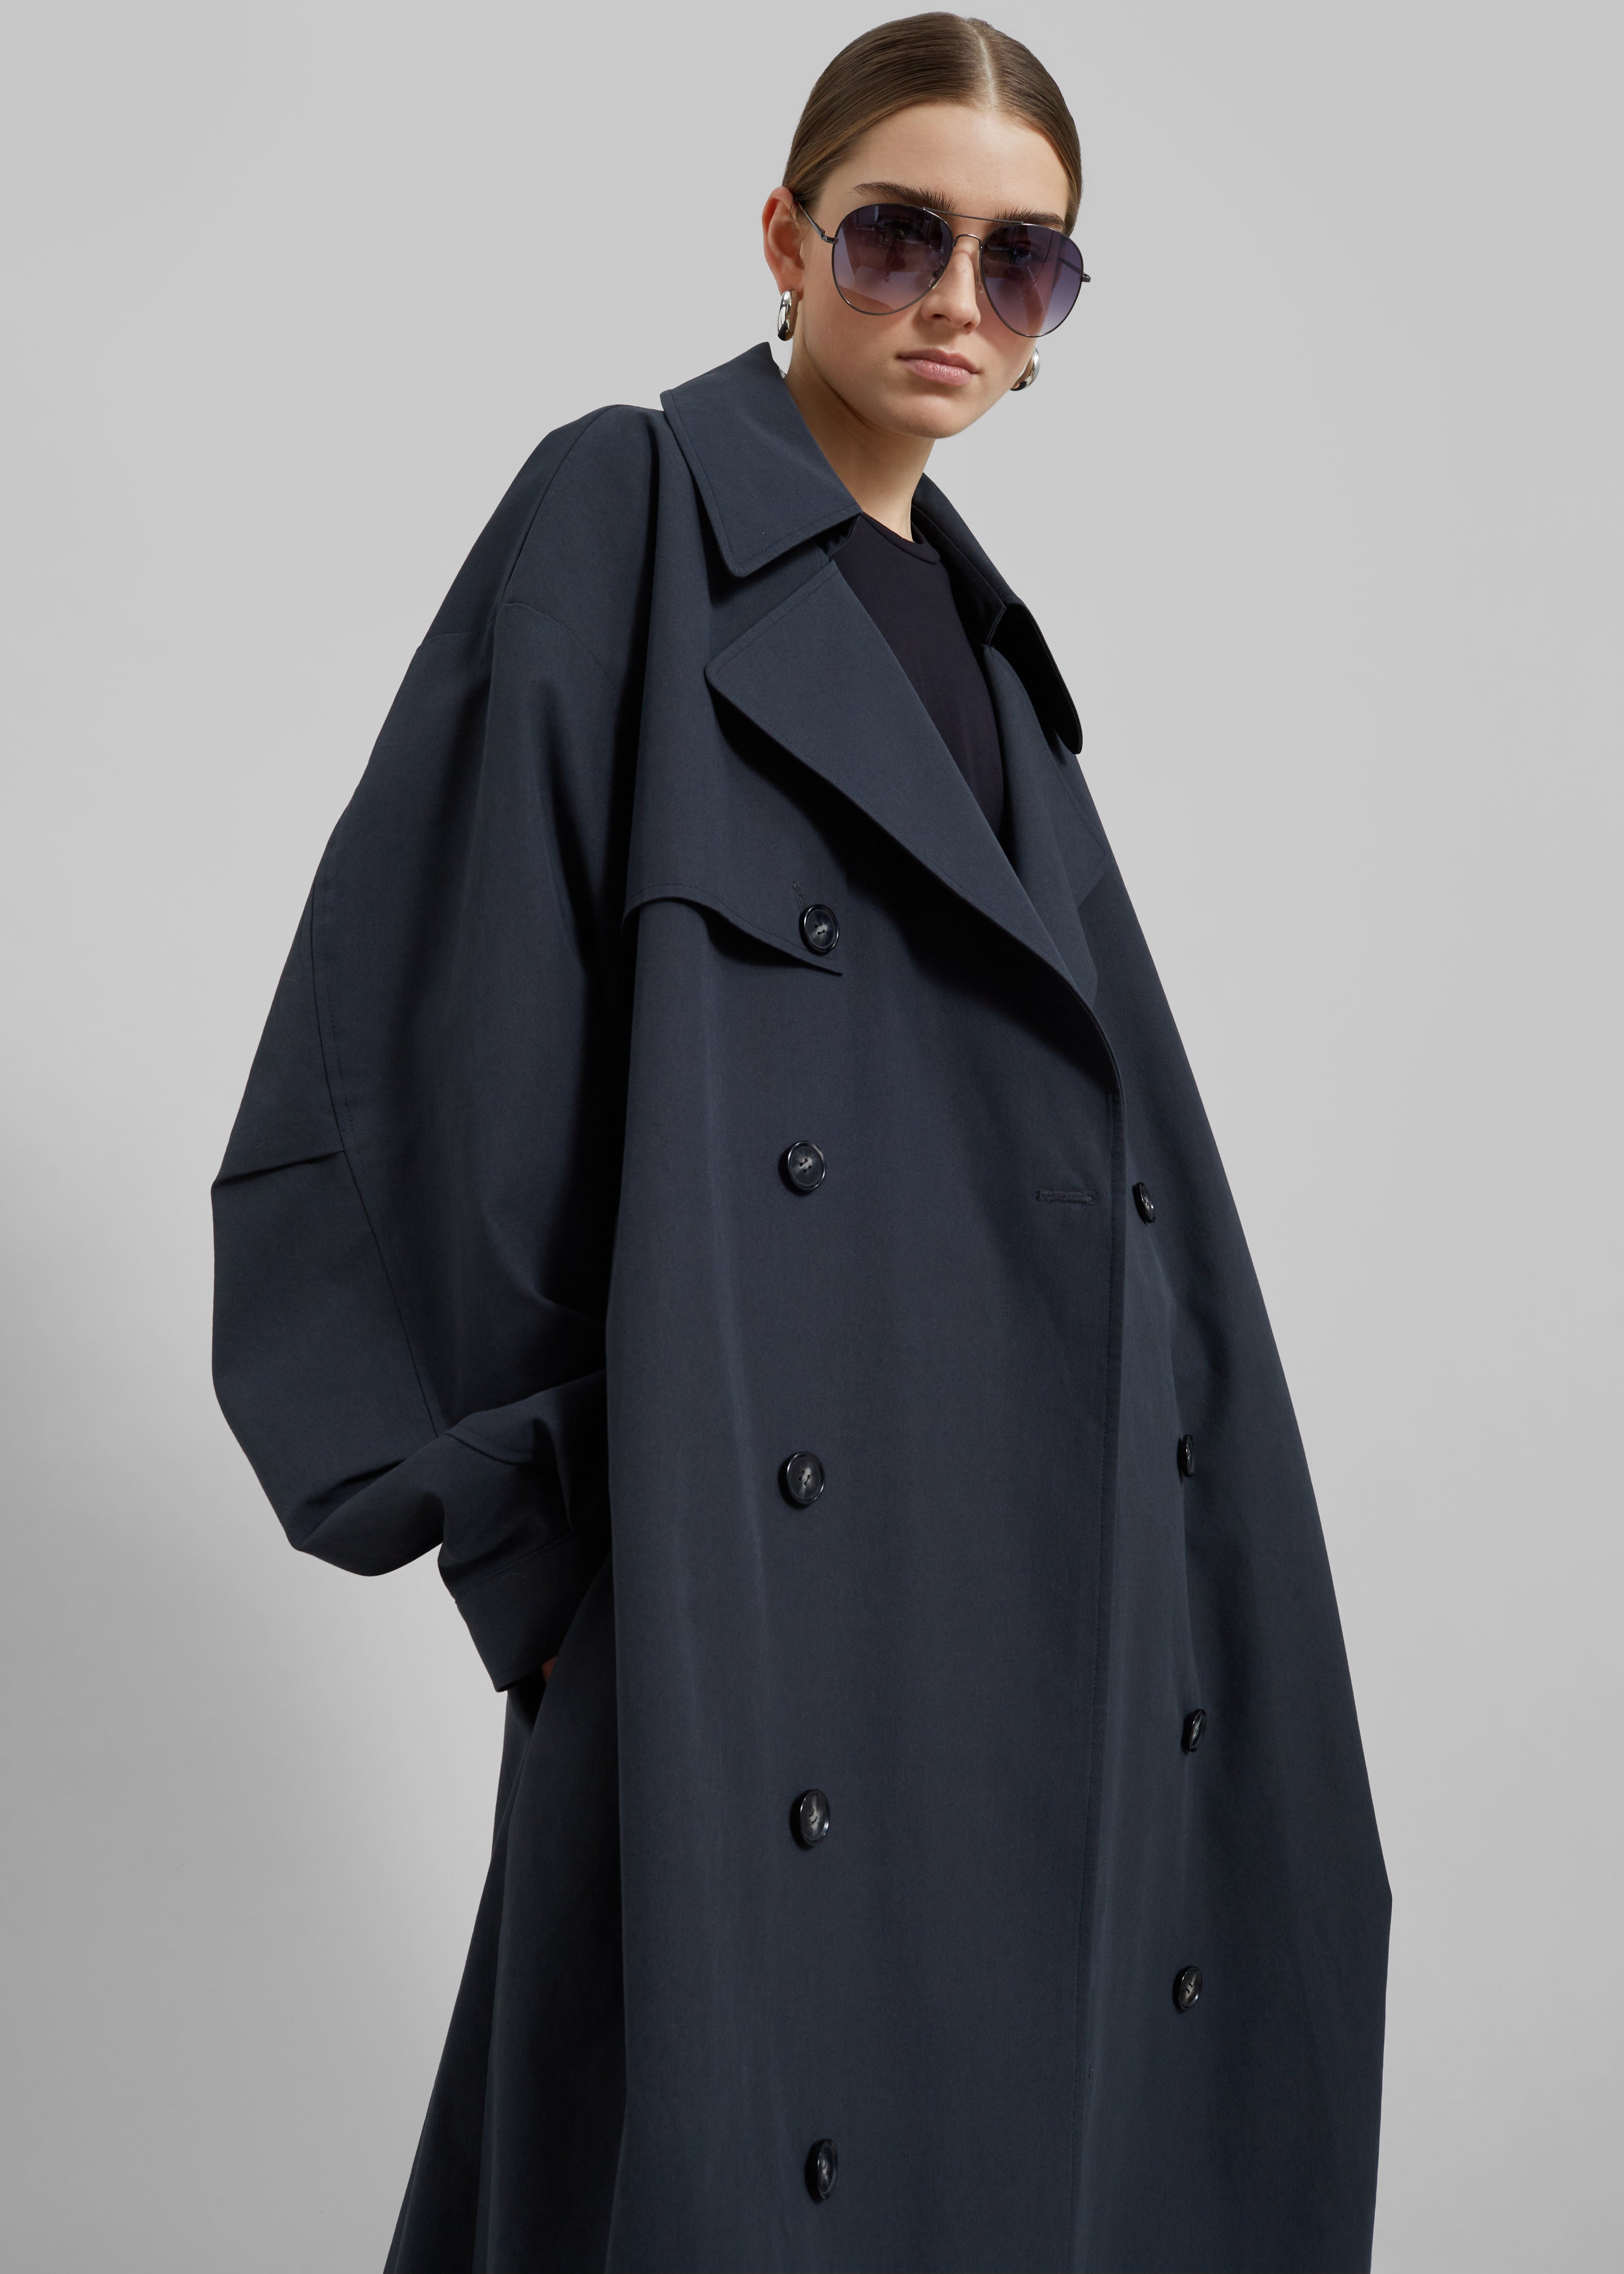 Anika Double Breasted Trench Coat - Navy - 2